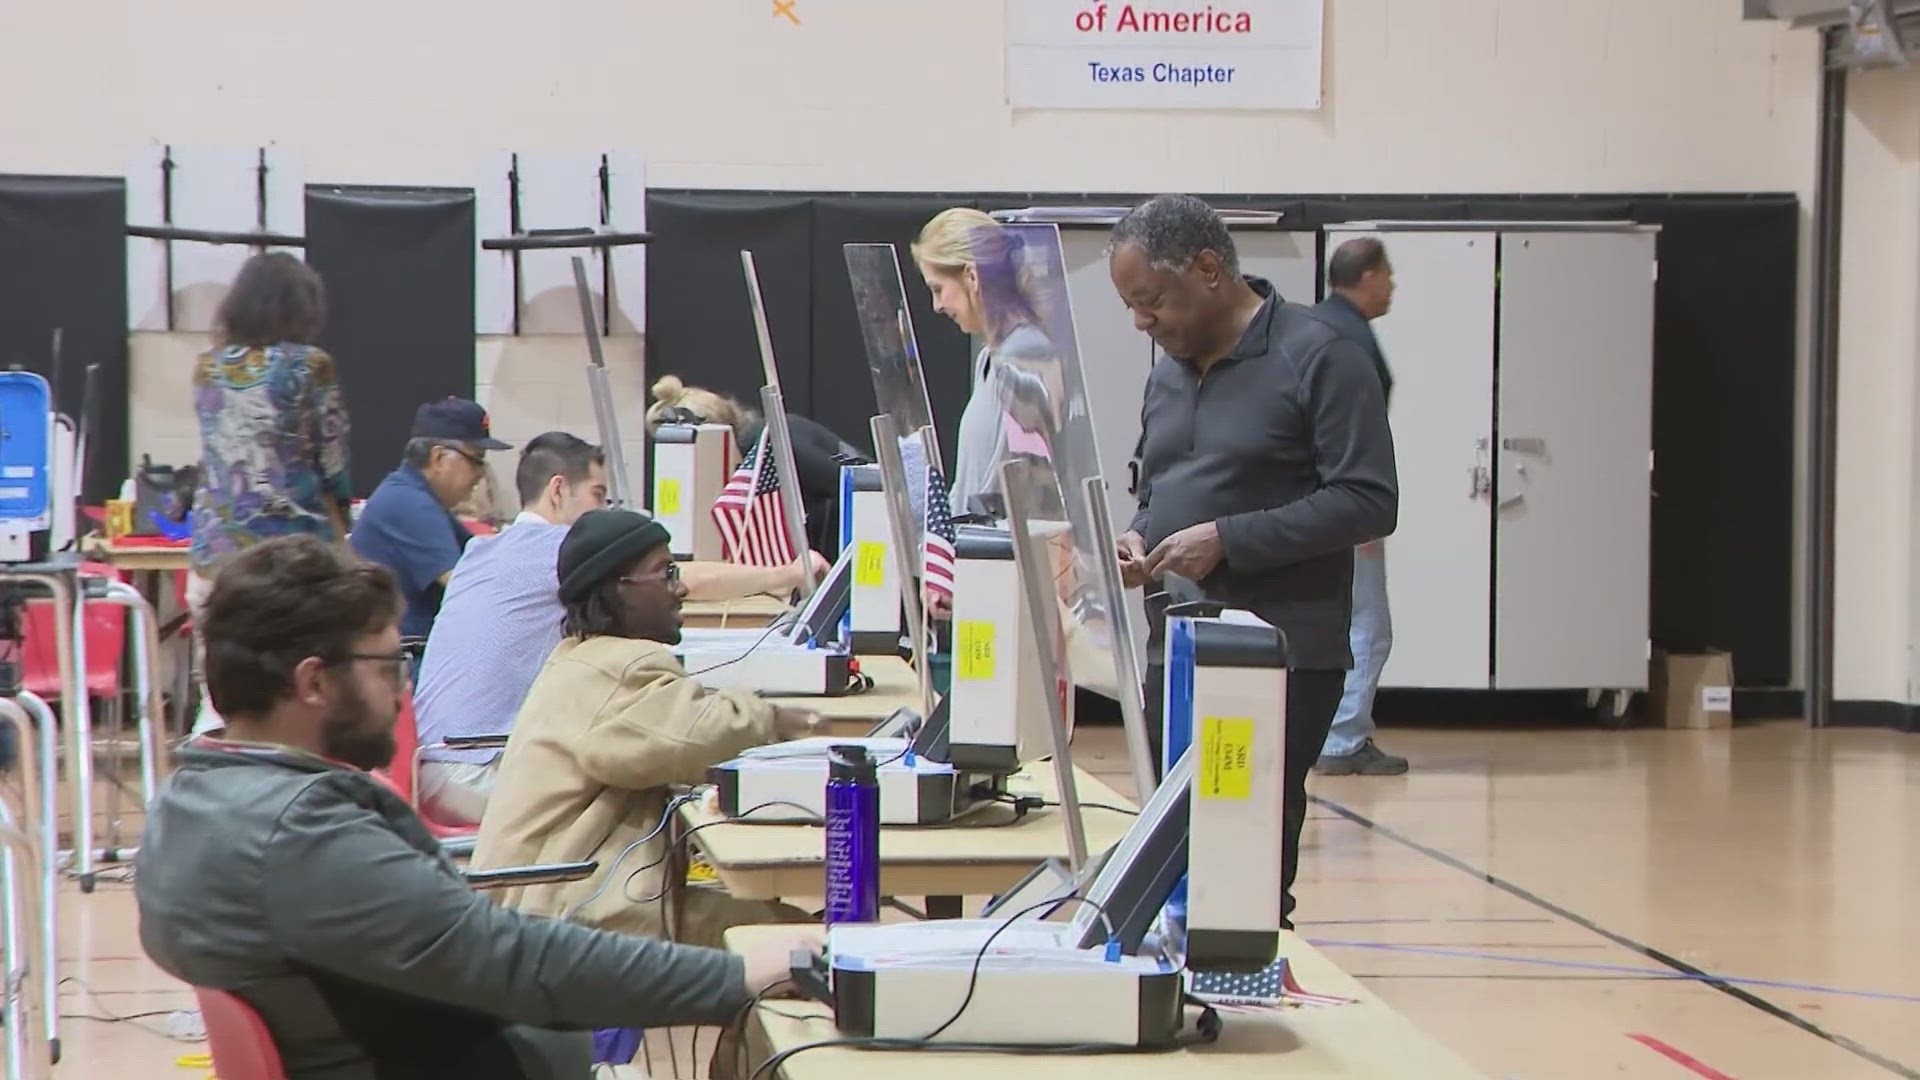 The survey took answers from 1,500 Texas registered voters between Jan. 11 and Jan. 24.